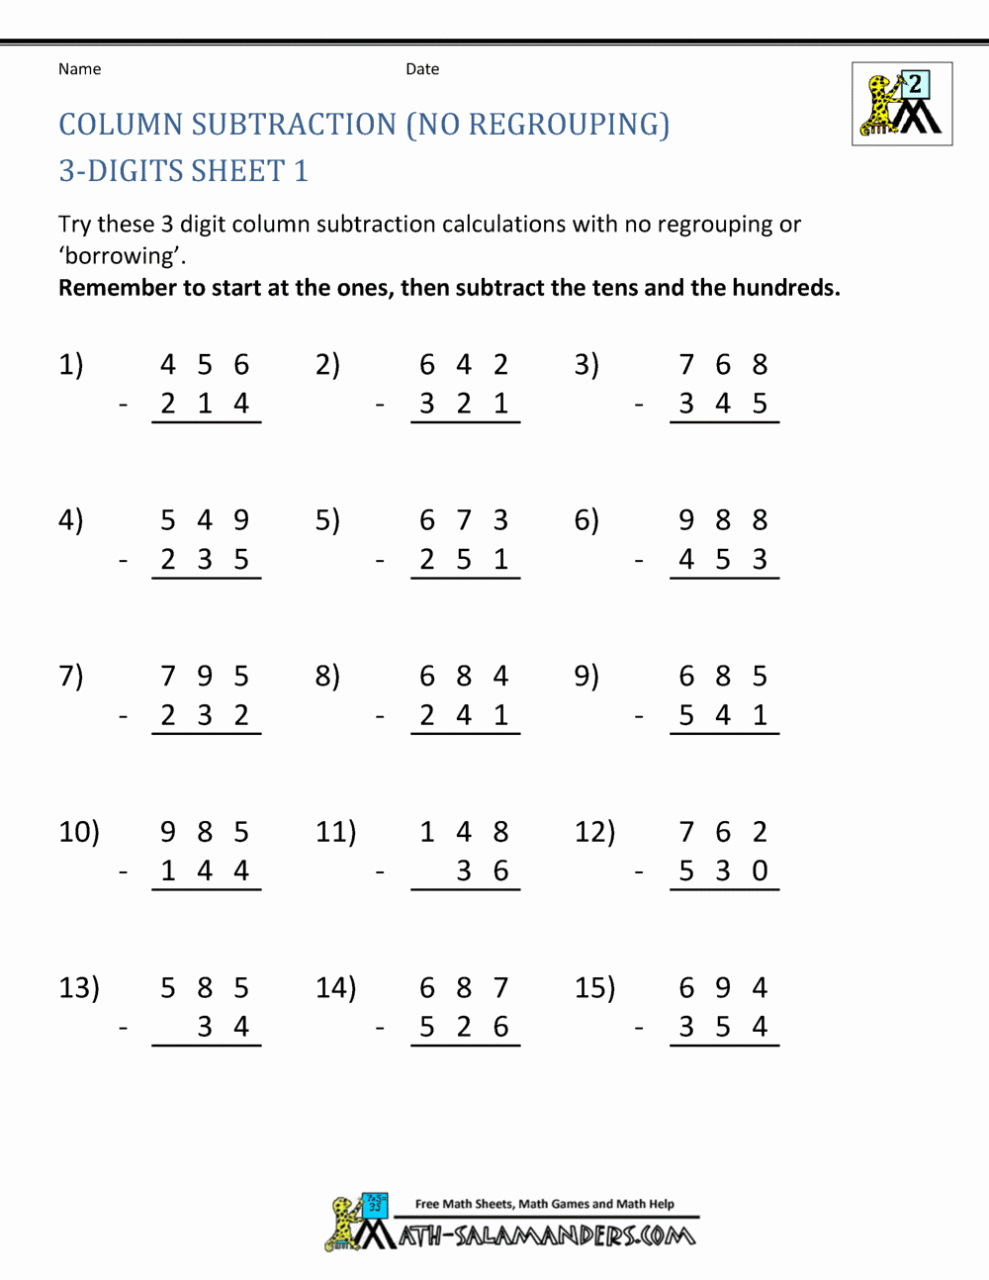 Subtraction Without Regrouping Worksheets For Grade 4 subtraction